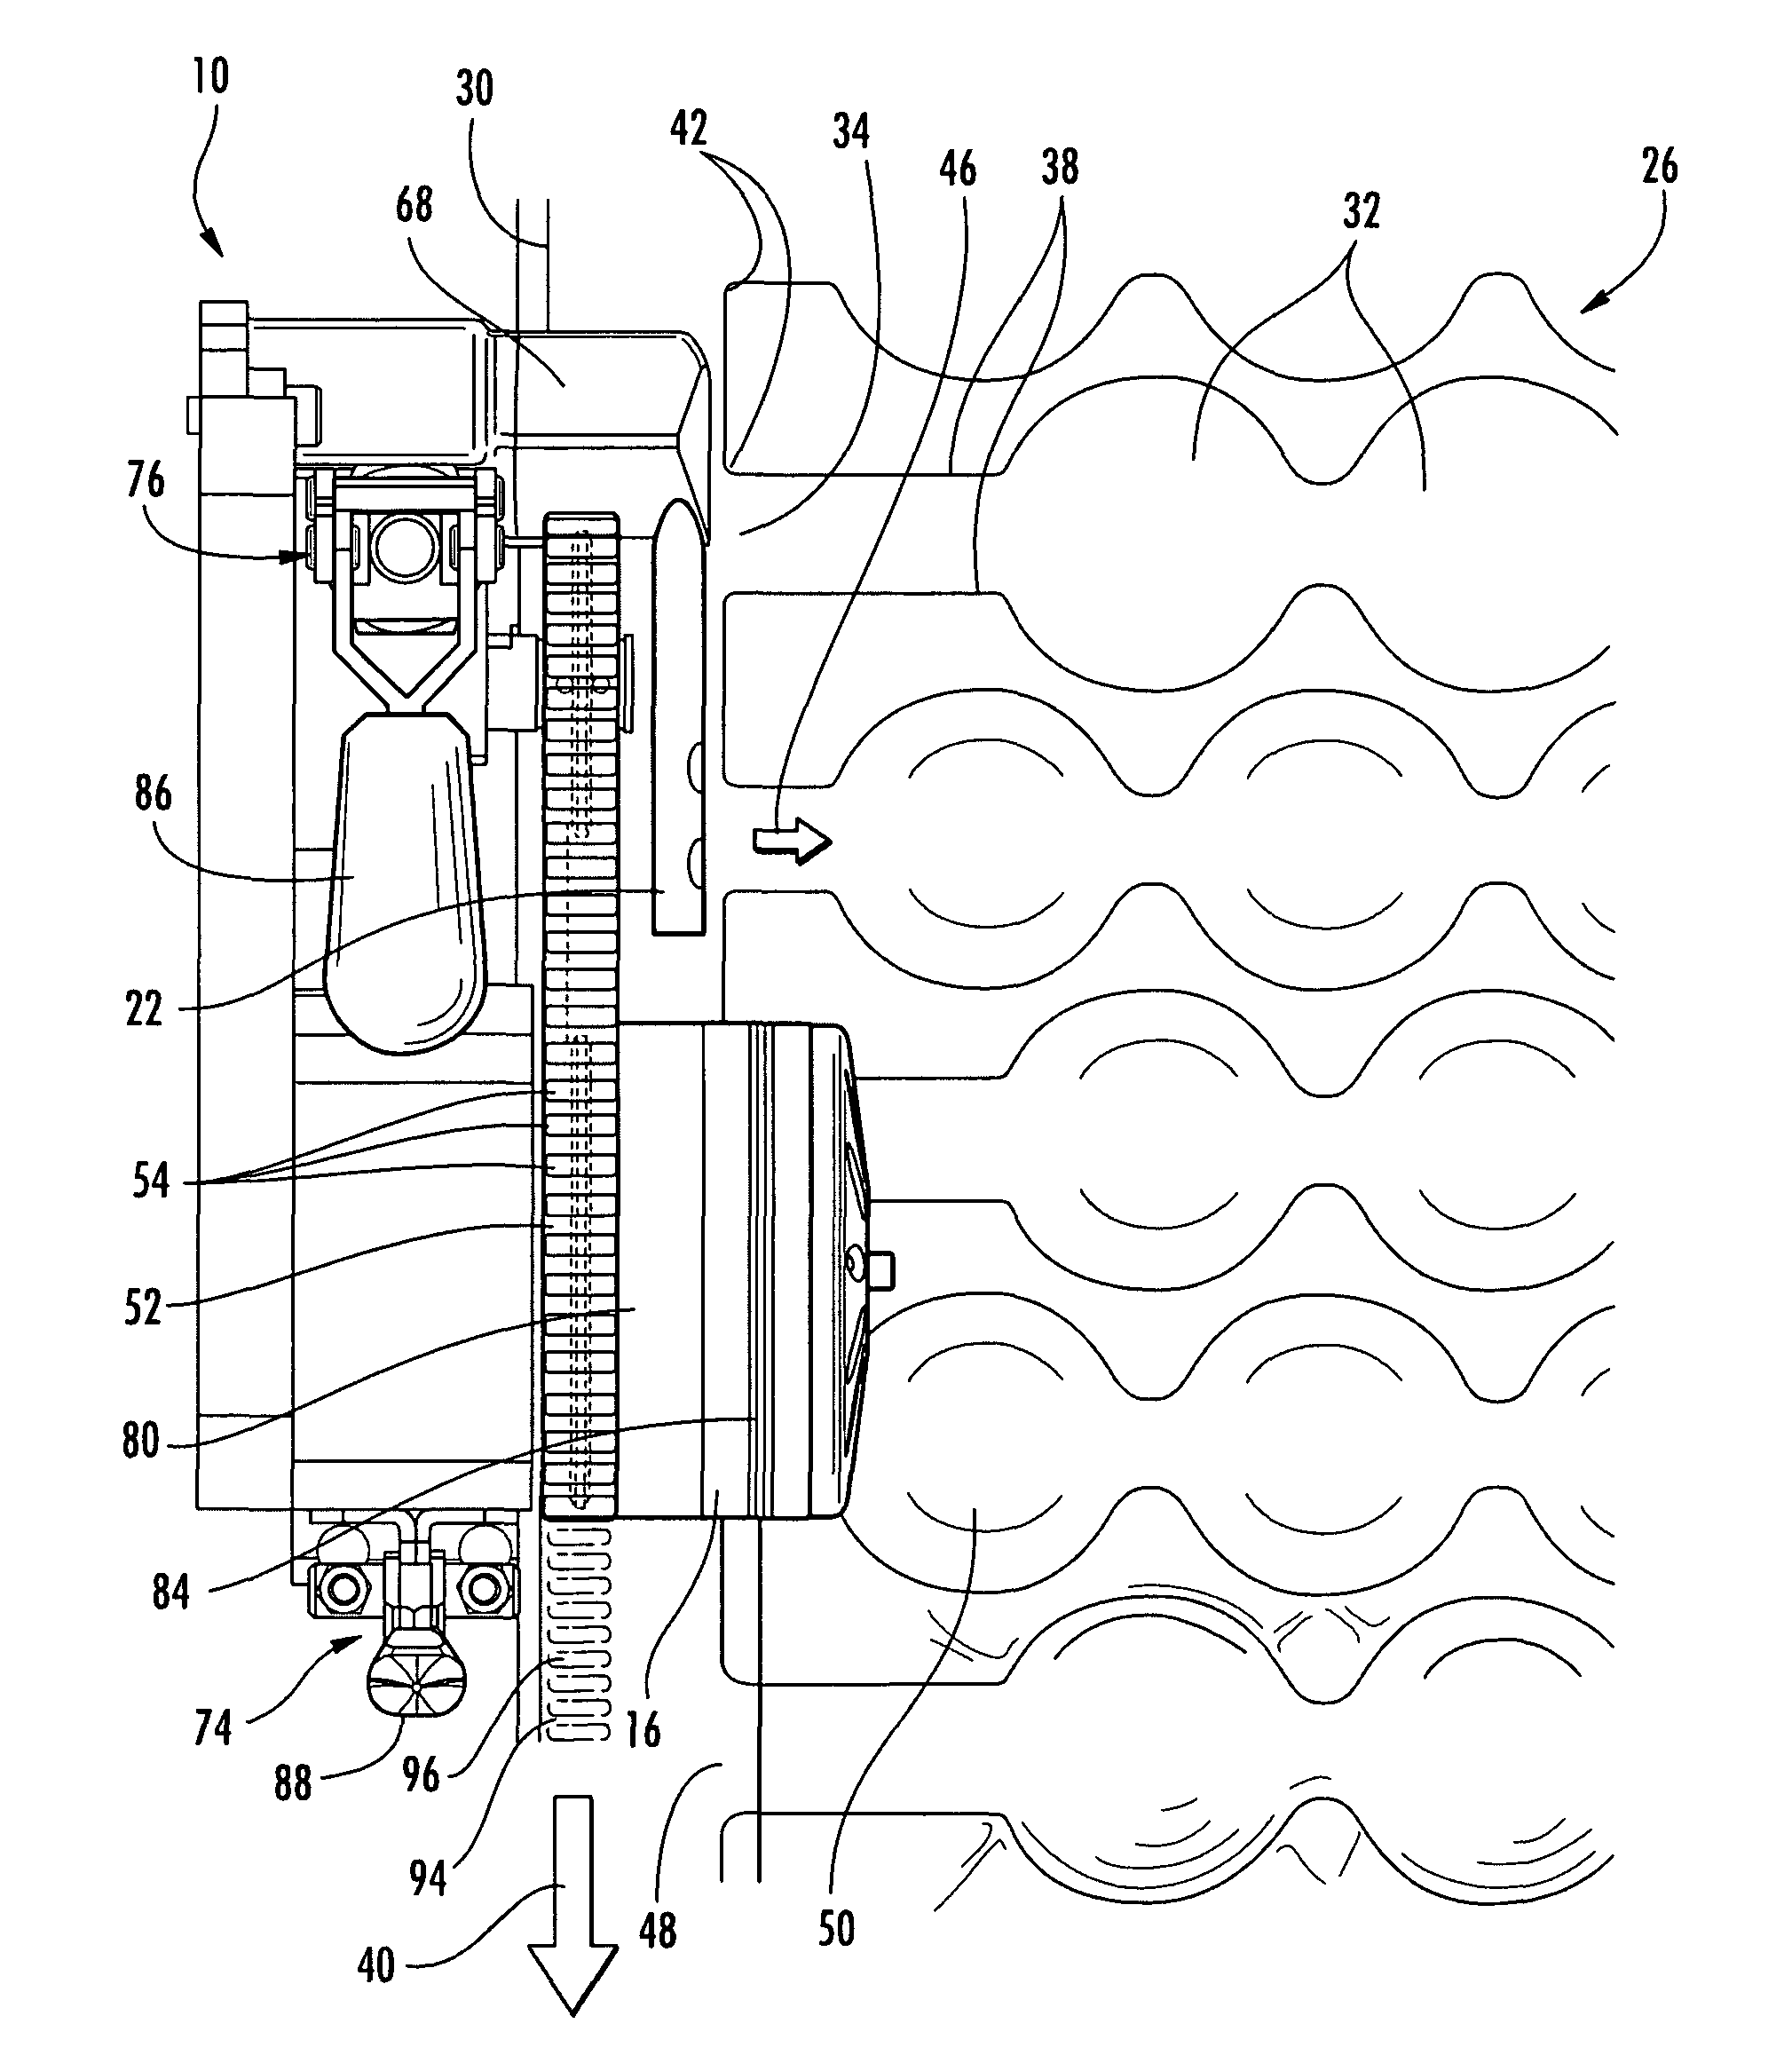 Machine for inflating and sealing an inflatable structure